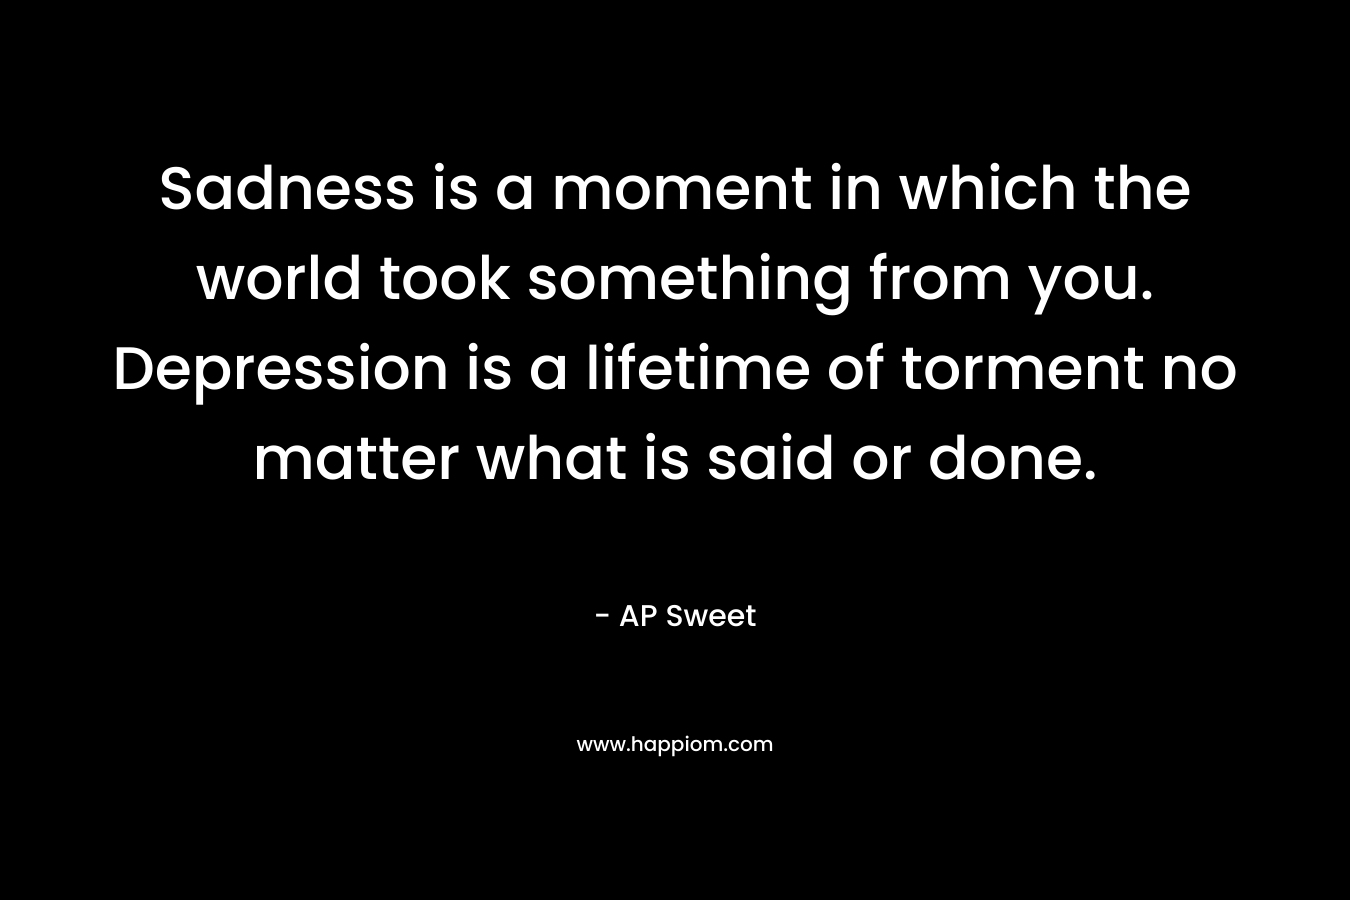 Sadness is a moment in which the world took something from you. Depression is a lifetime of torment no matter what is said or done. – AP Sweet